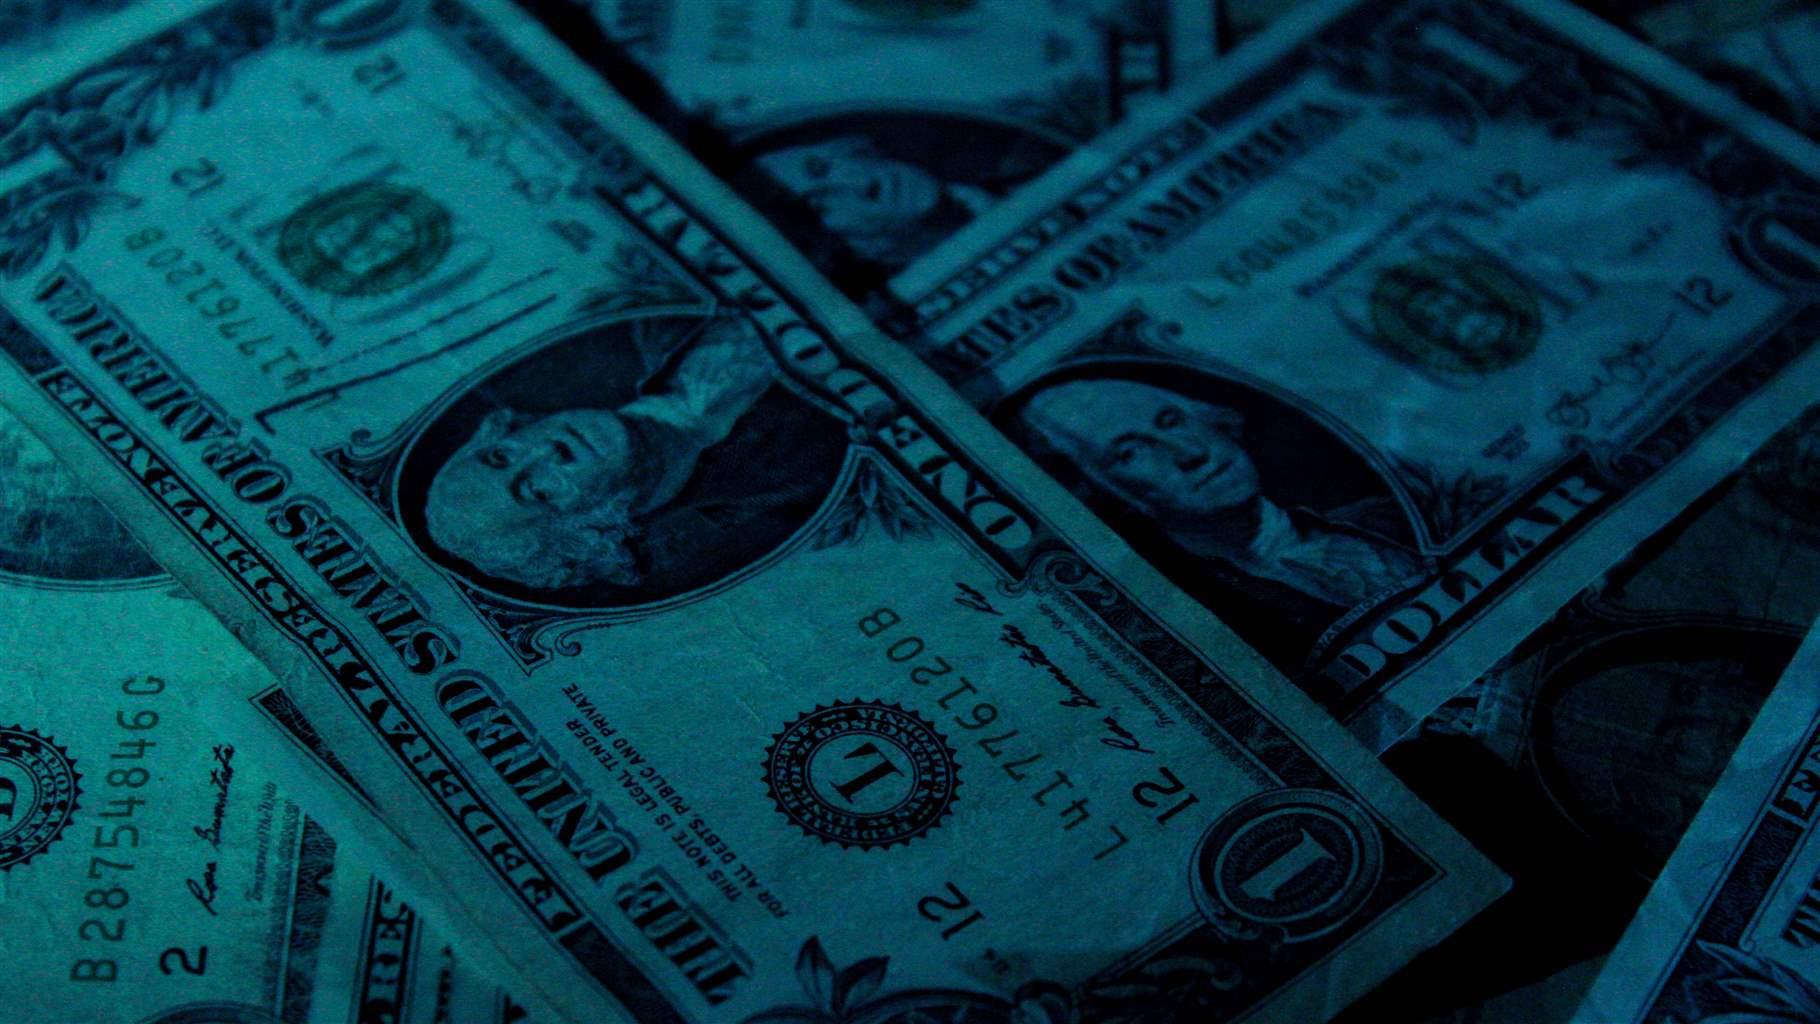 Dollar bills layered and spread out with a blue tint